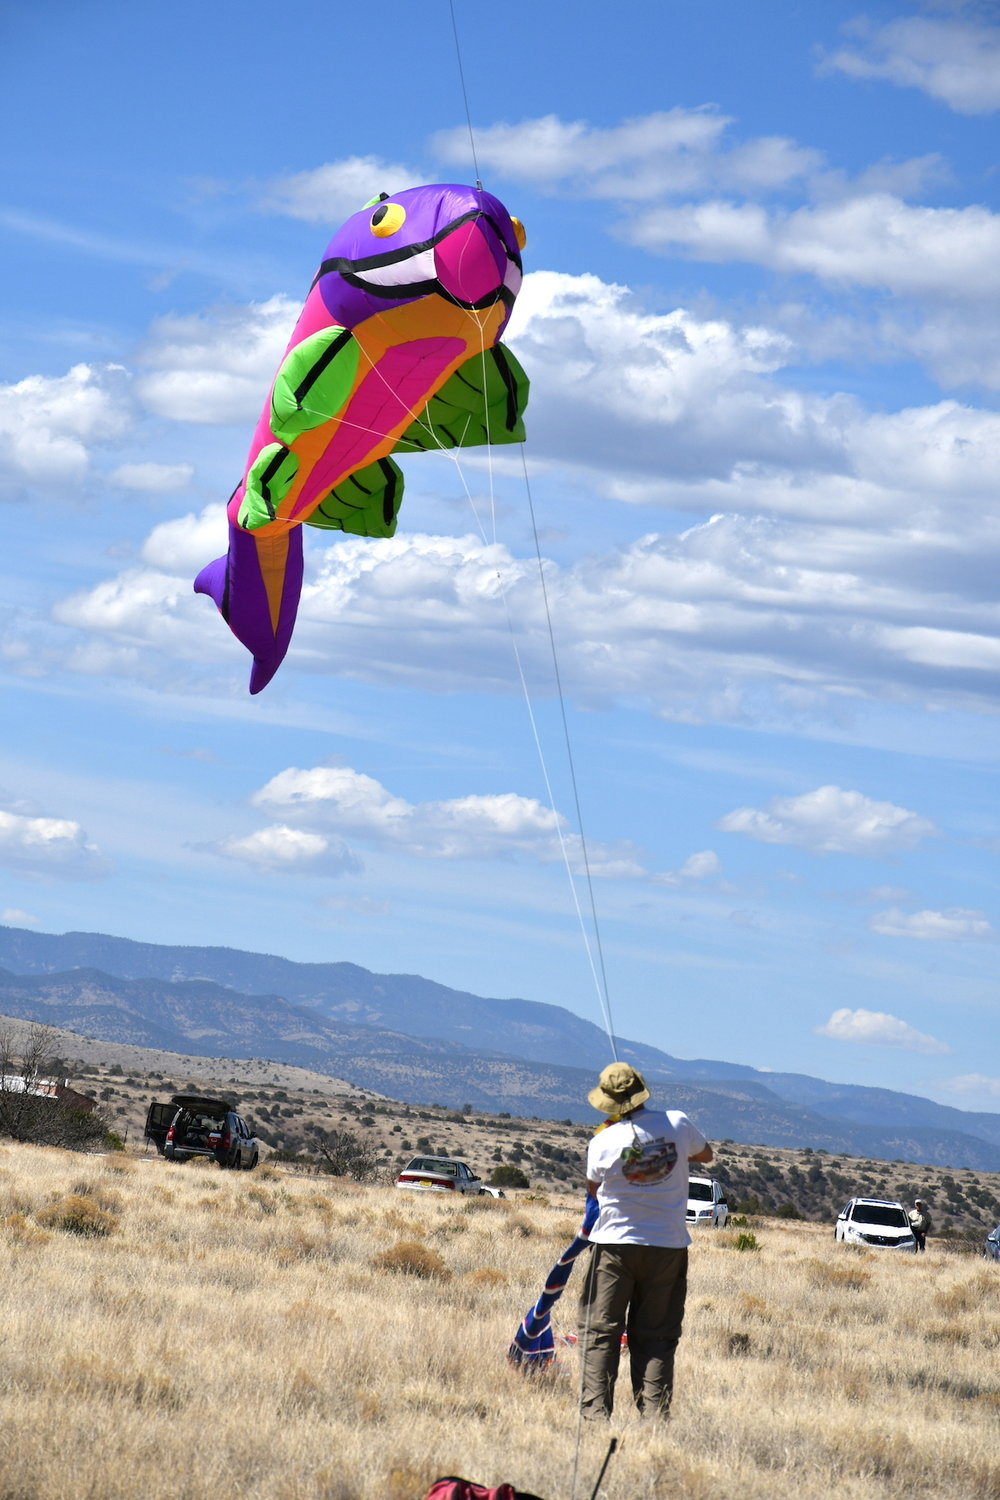 This colorful fish kite was a big hit at a previous kitefest.